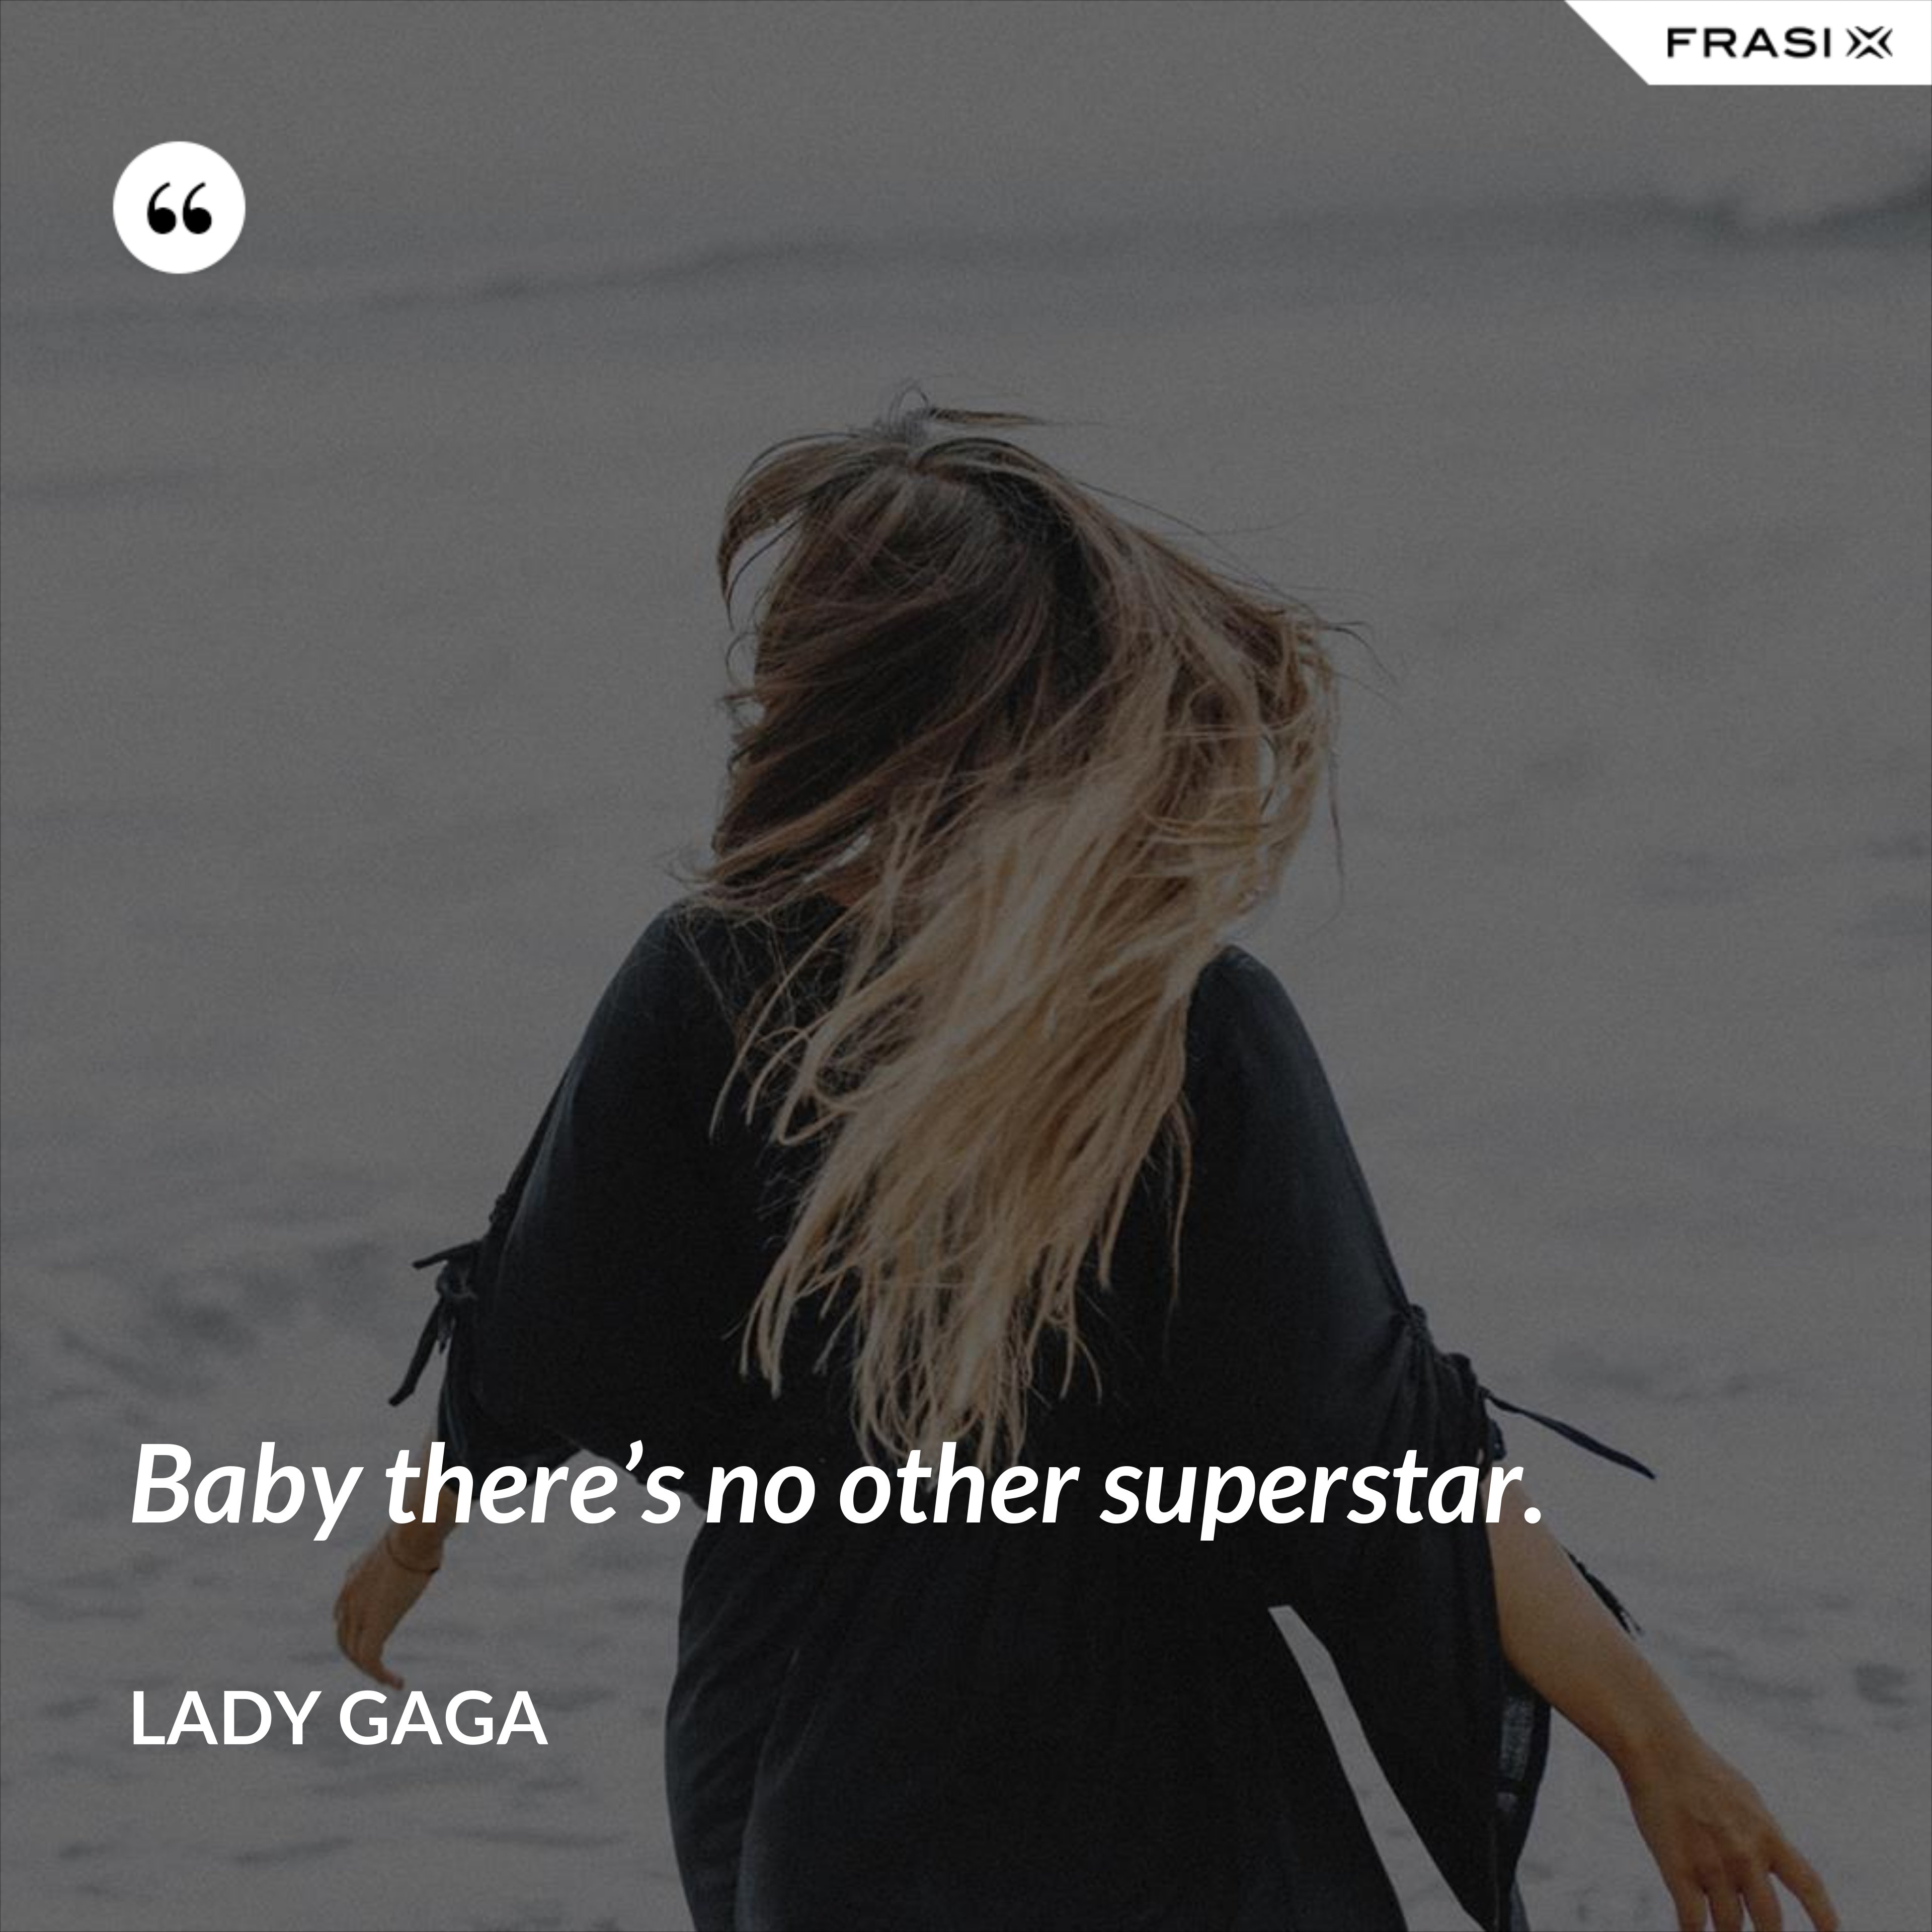 Baby there’s no other superstar. - Lady Gaga